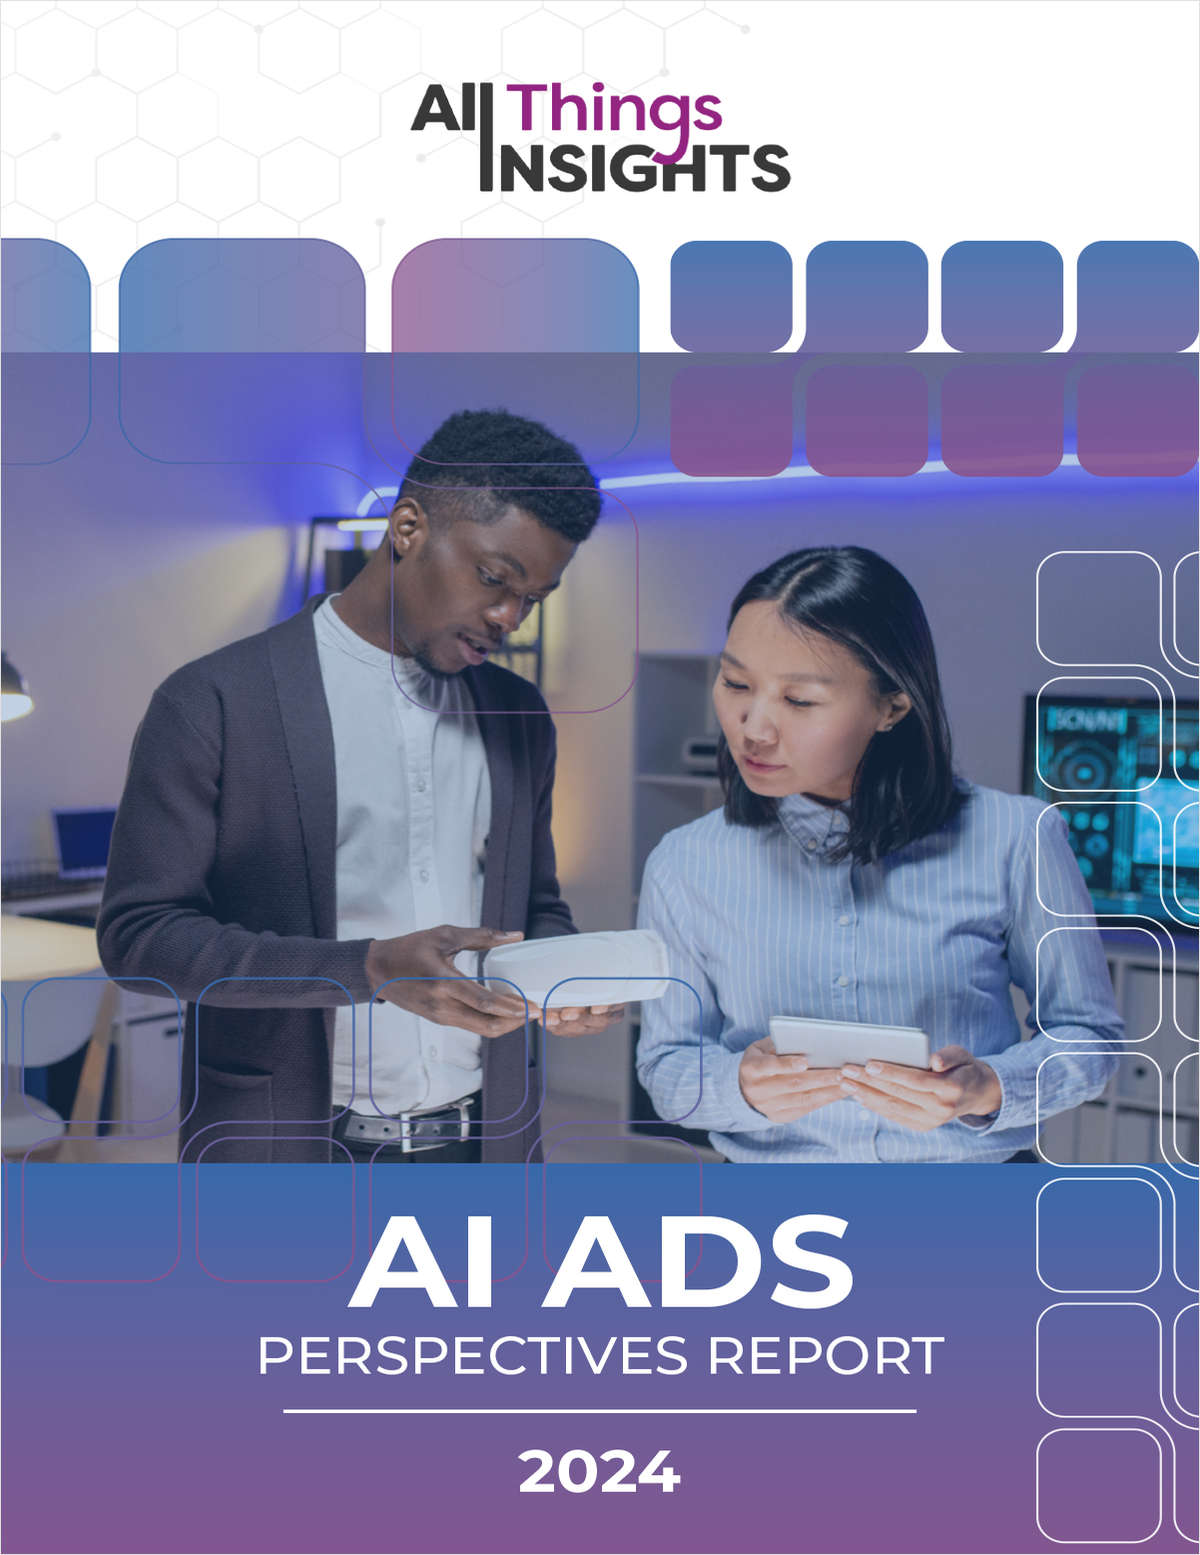 All Things Insights Releases AI ADS Perspectives Report 2024